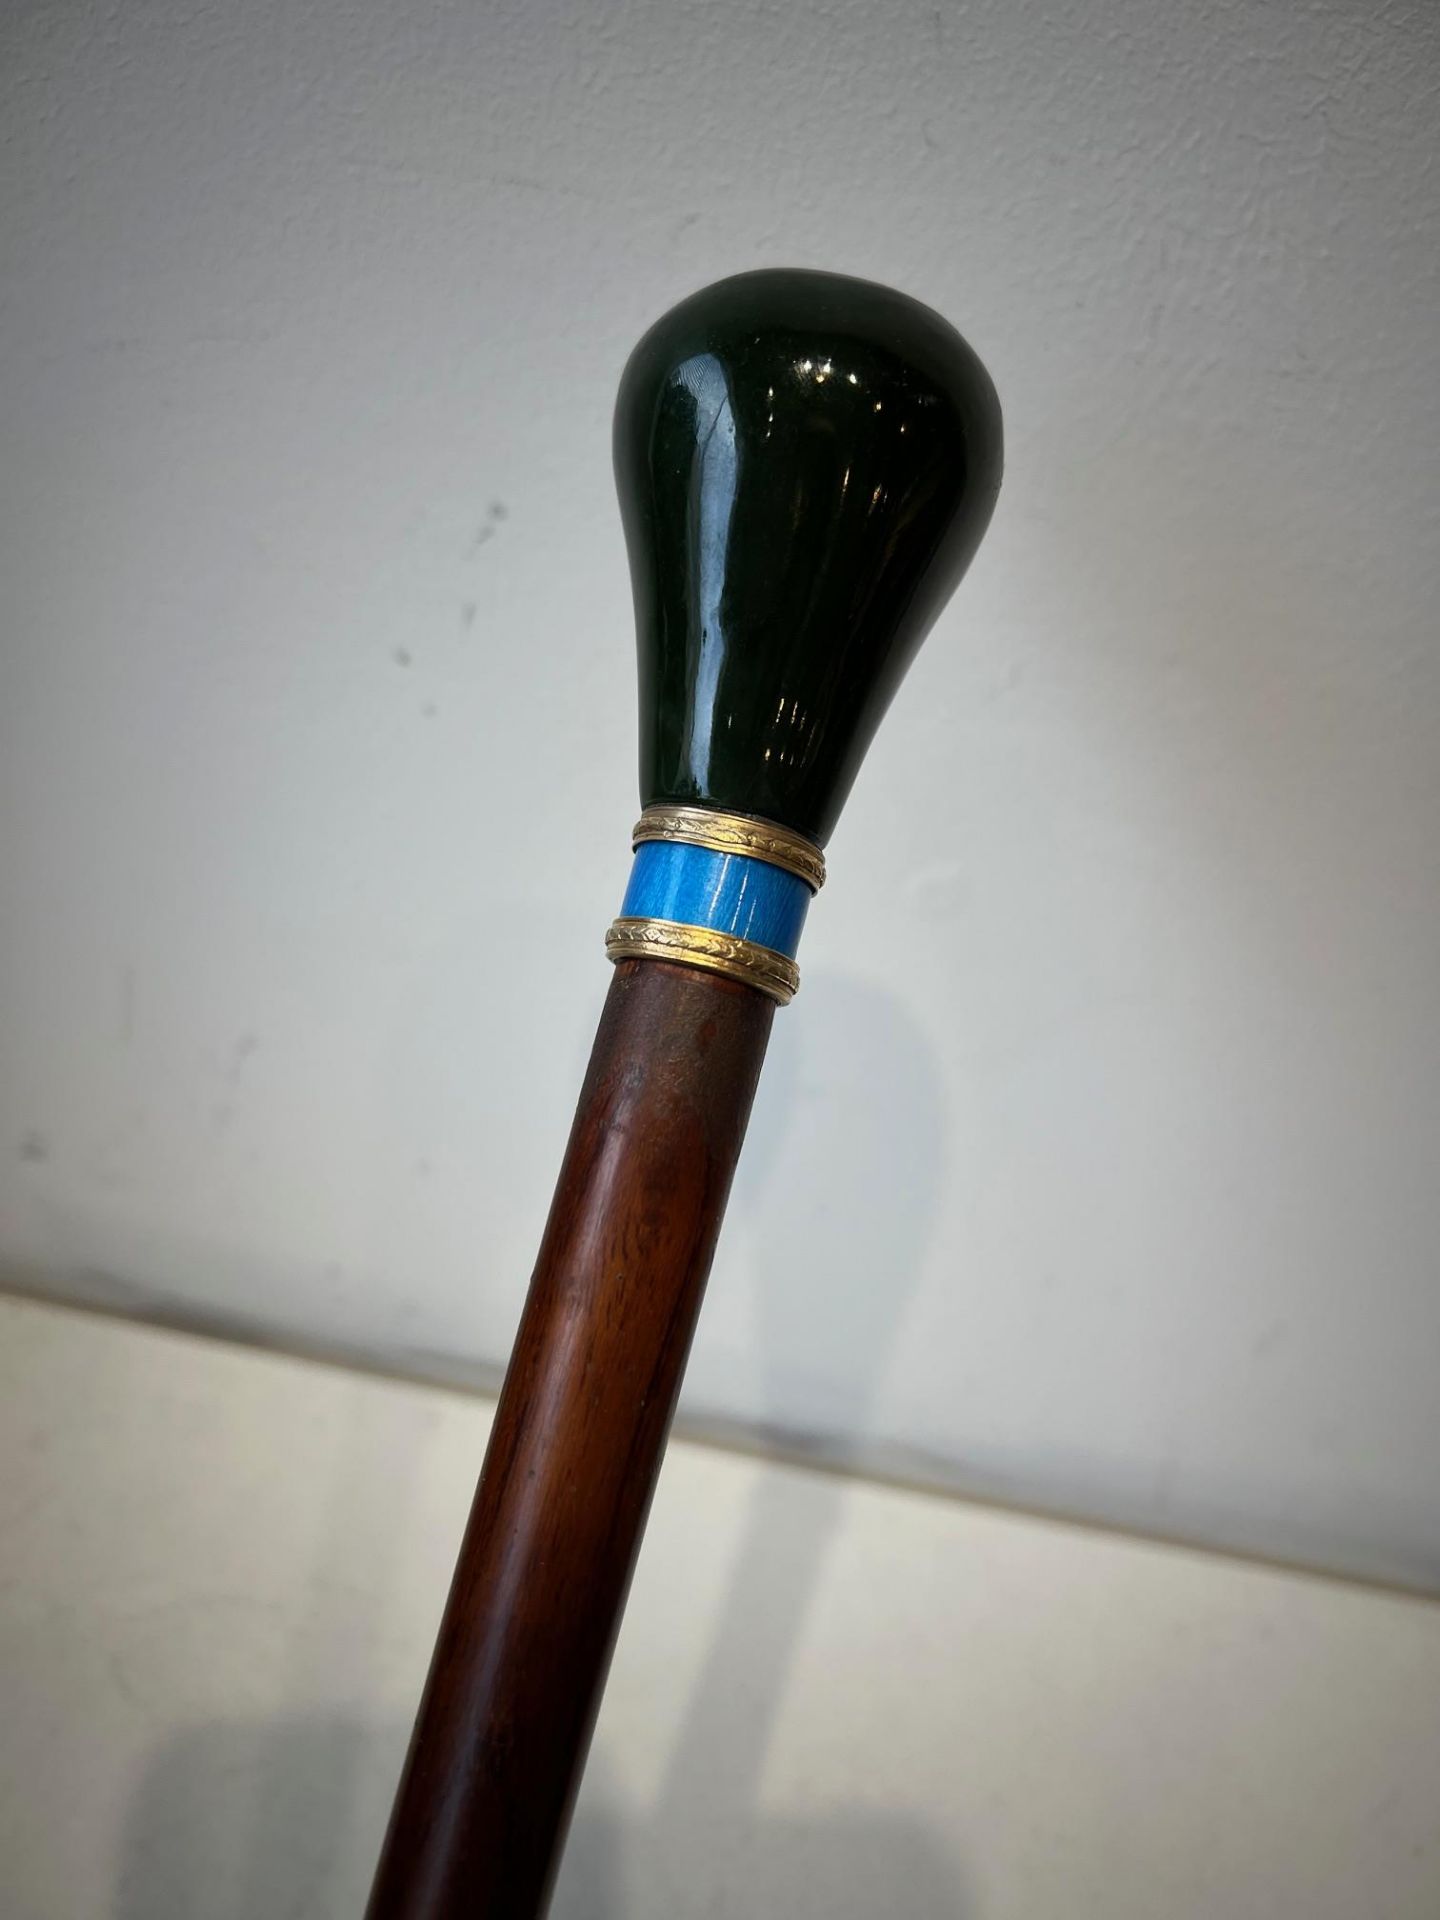 A FABERGE STYLE SILVER GILT, NEPHRITE JADE AND ENAMEL WALKING CANE - Image 2 of 8